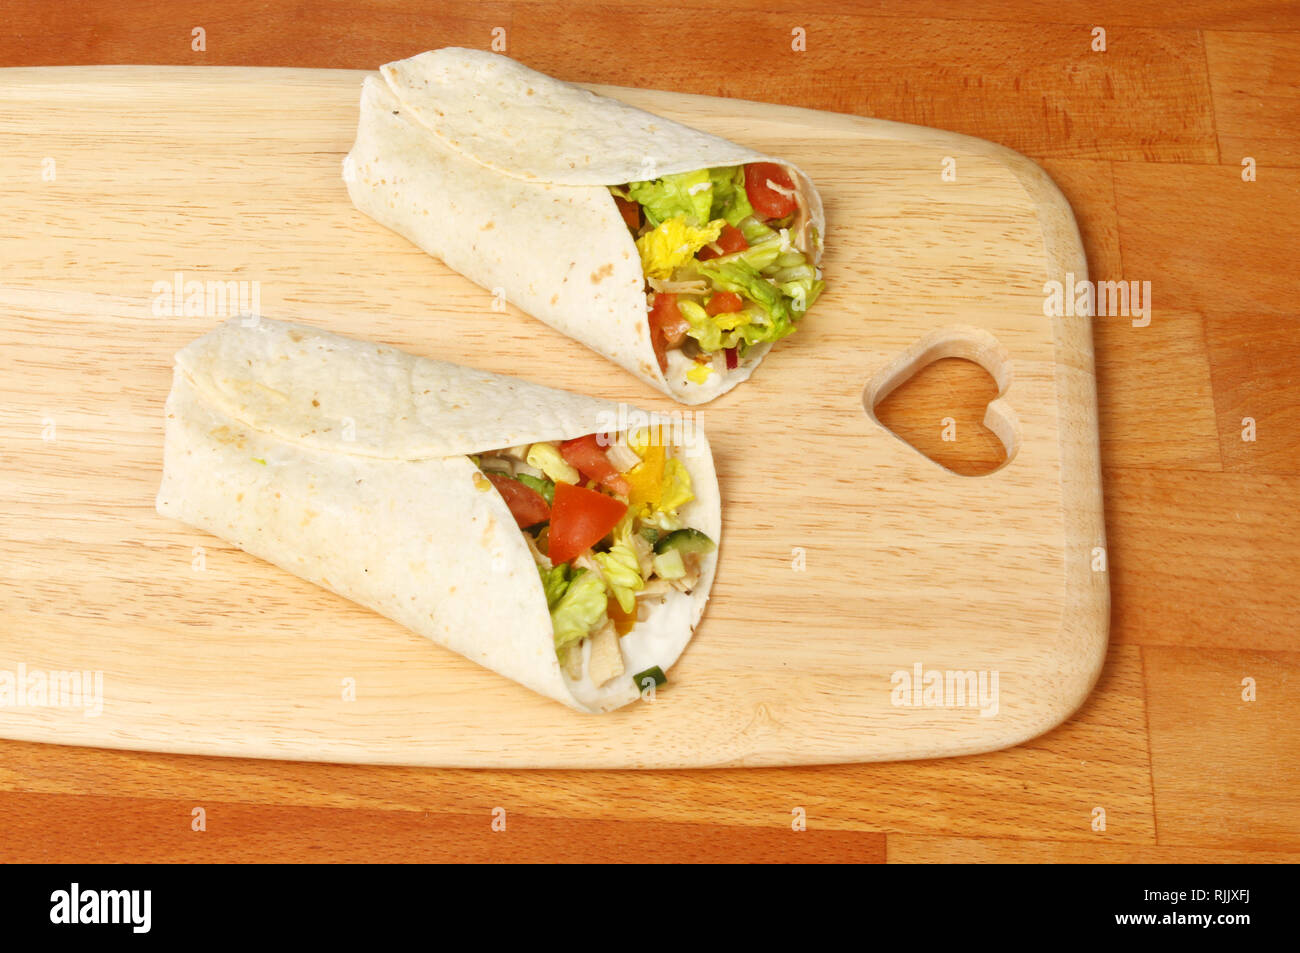 Chicken and sald sandwich wraps on a wooden chopping board with a heart shaped cutout Stock Photo